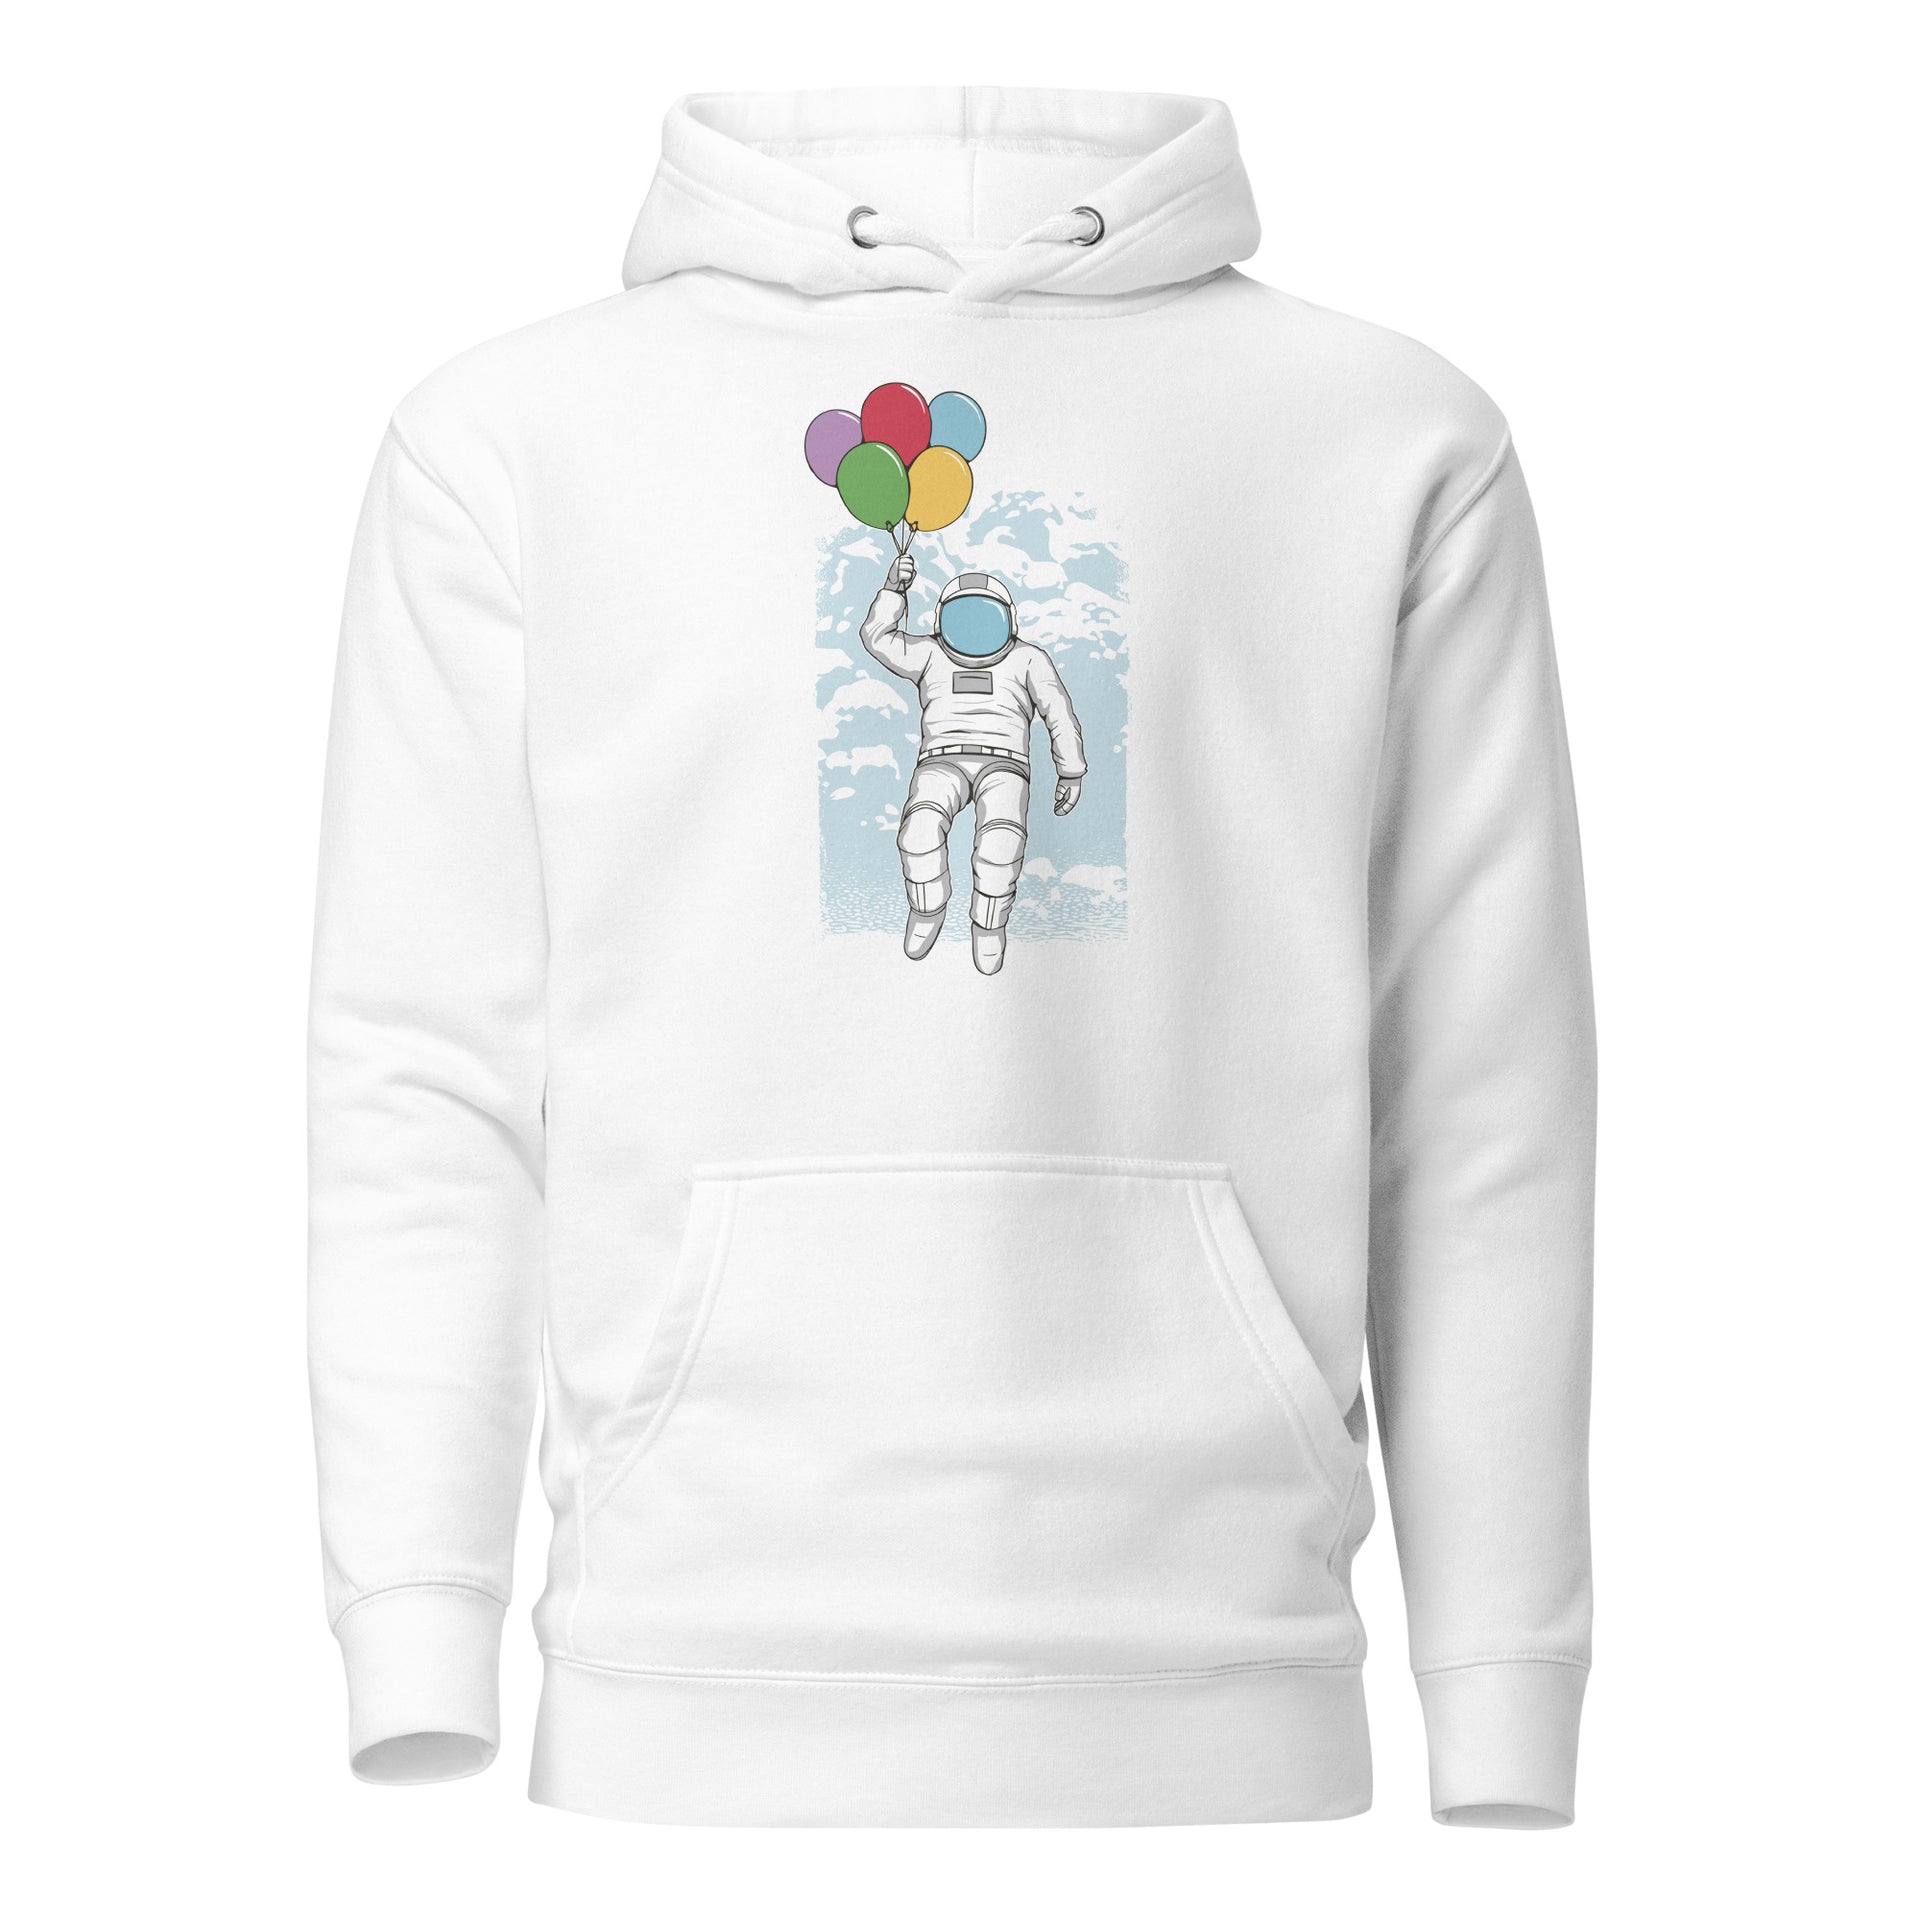 Astronaut Floating With Balloons Unisex Hoodie